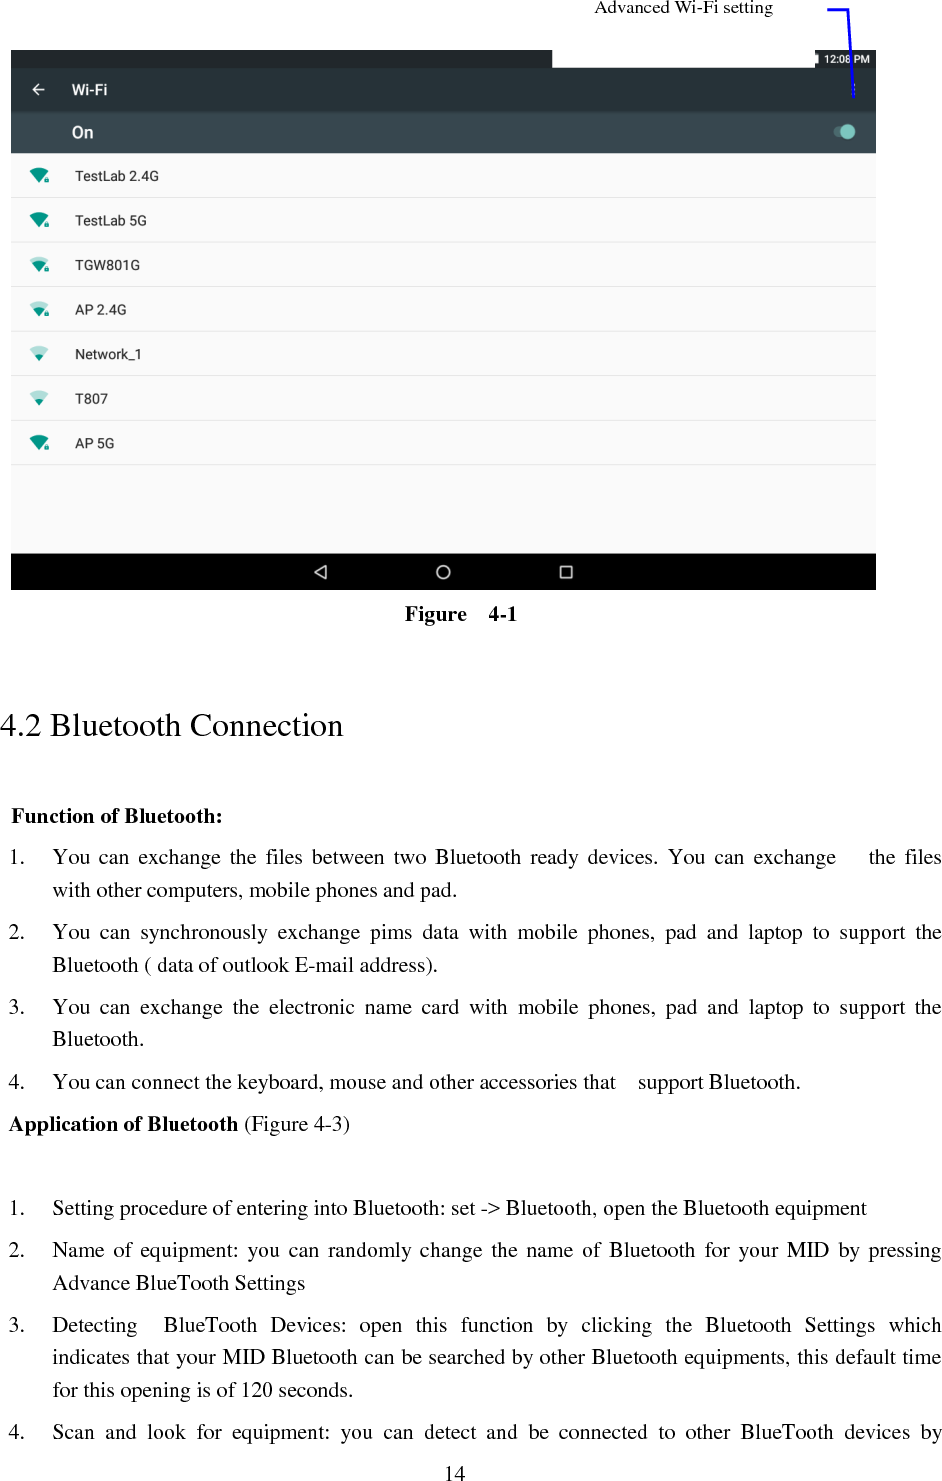  14           Figure    4-1   4.2 Bluetooth Connection   Function of Bluetooth: 1. You  can  exchange  the  files  between  two  Bluetooth  ready devices. You  can  exchange      the files with other computers, mobile phones and pad.   2. You  can  synchronously  exchange  pims  data  with  mobile  phones,  pad  and  laptop  to  support  the Bluetooth ( data of outlook E-mail address). 3. You  can  exchange  the  electronic  name  card  with  mobile  phones,  pad  and  laptop  to  support  the Bluetooth. 4. You can connect the keyboard, mouse and other accessories that    support Bluetooth. Application of Bluetooth (Figure 4-3)  1. Setting procedure of entering into Bluetooth: set -&gt; Bluetooth, open the Bluetooth equipment   2. Name of  equipment: you can randomly change the name of  Bluetooth for your MID  by pressing  Advance BlueTooth Settings 3. Detecting    BlueTooth  Devices:  open  this  function  by  clicking  the  Bluetooth  Settings  which indicates that your MID Bluetooth can be searched by other Bluetooth equipments, this default time for this opening is of 120 seconds.   4. Scan  and  look  for  equipment:  you  can  detect  and  be  connected  to  other  BlueTooth  devices  by Advanced Wi-Fi setting 